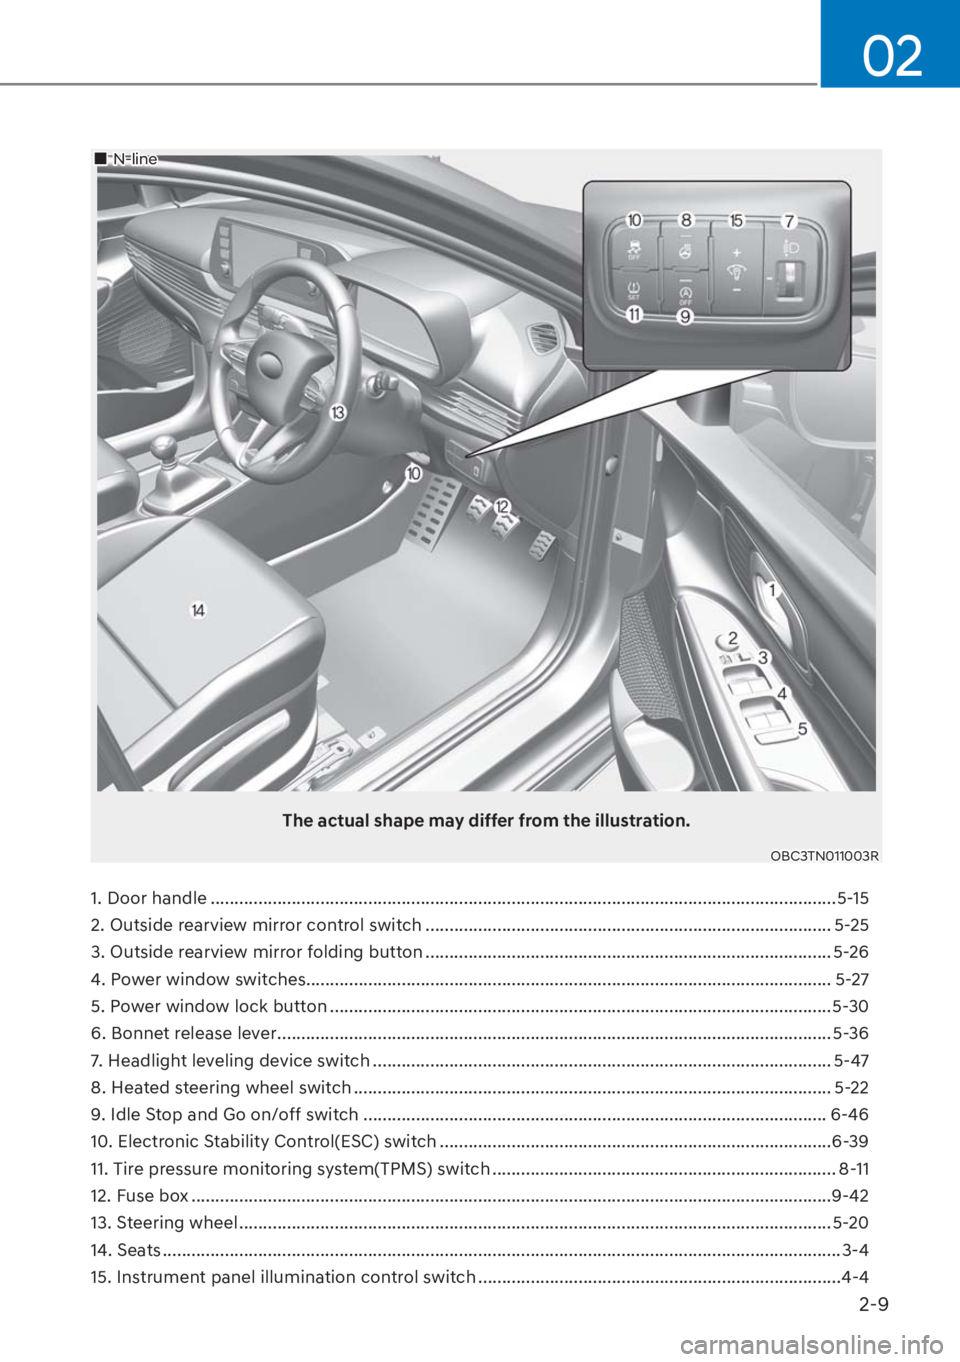 HYUNDAI I20 2023 User Guide 2-9
02
1. Door handle ...................................................................................................................................5-15
2. Outside rearview mirror control switch 